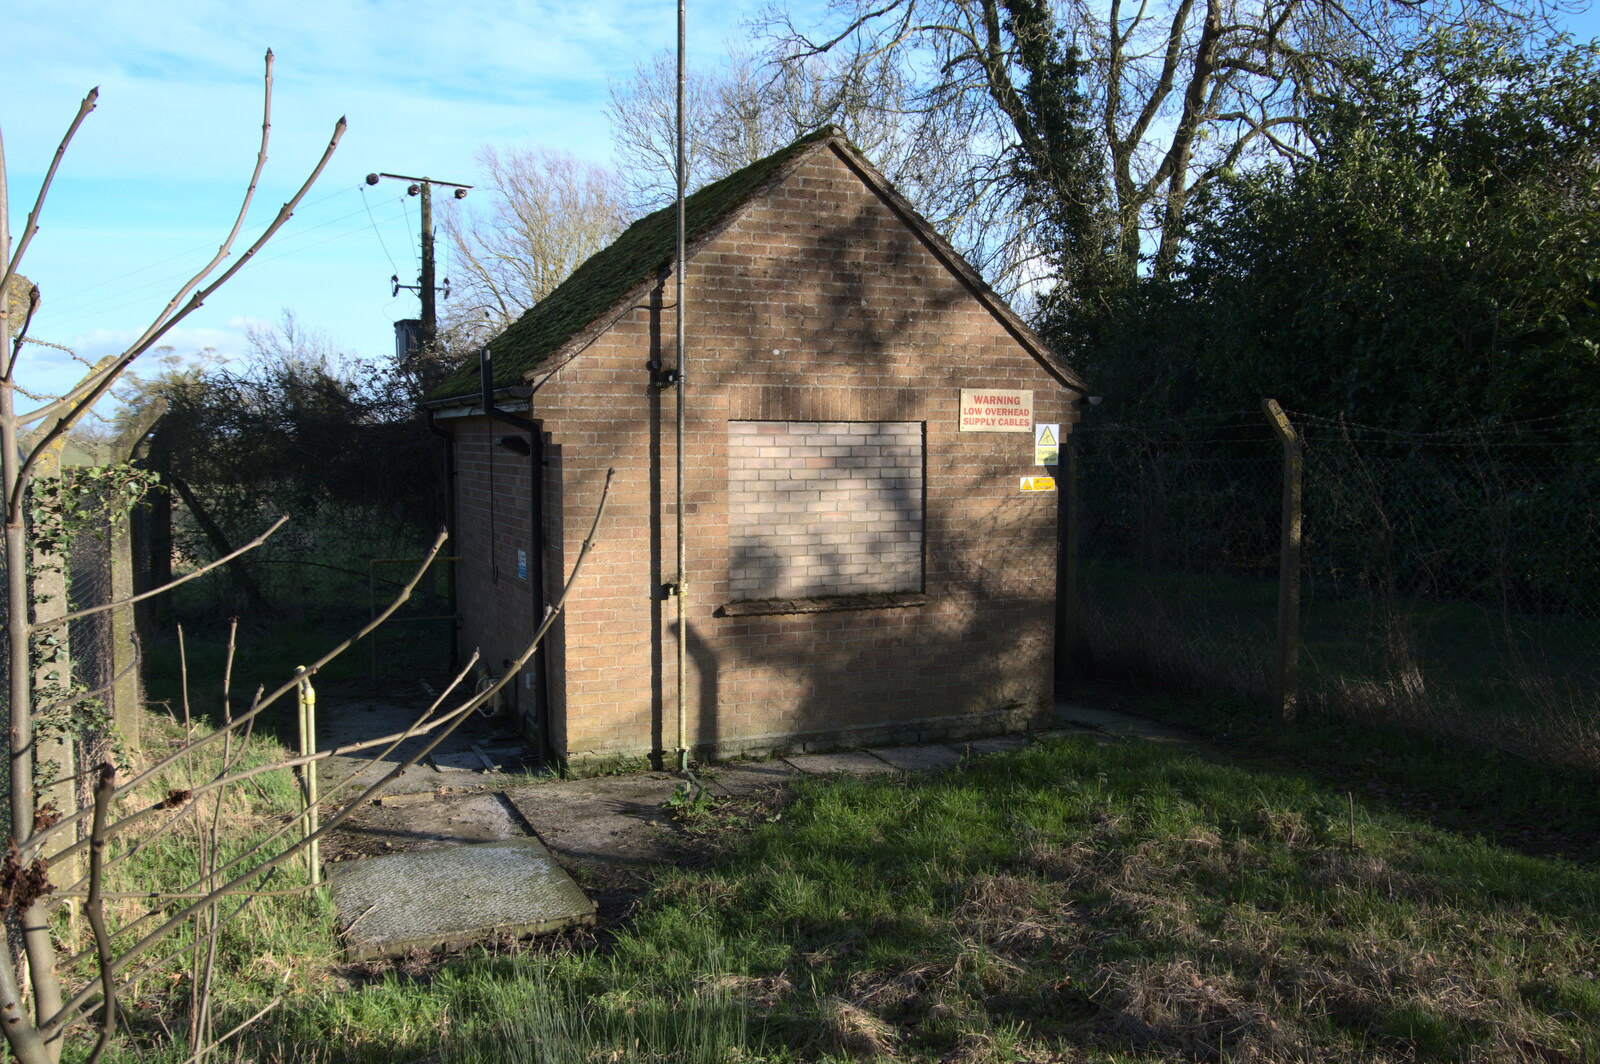 Some sort of pumping station from Snowdrops at Talconeston Hall, Tacolneston, Norfolk - 7th February 2020